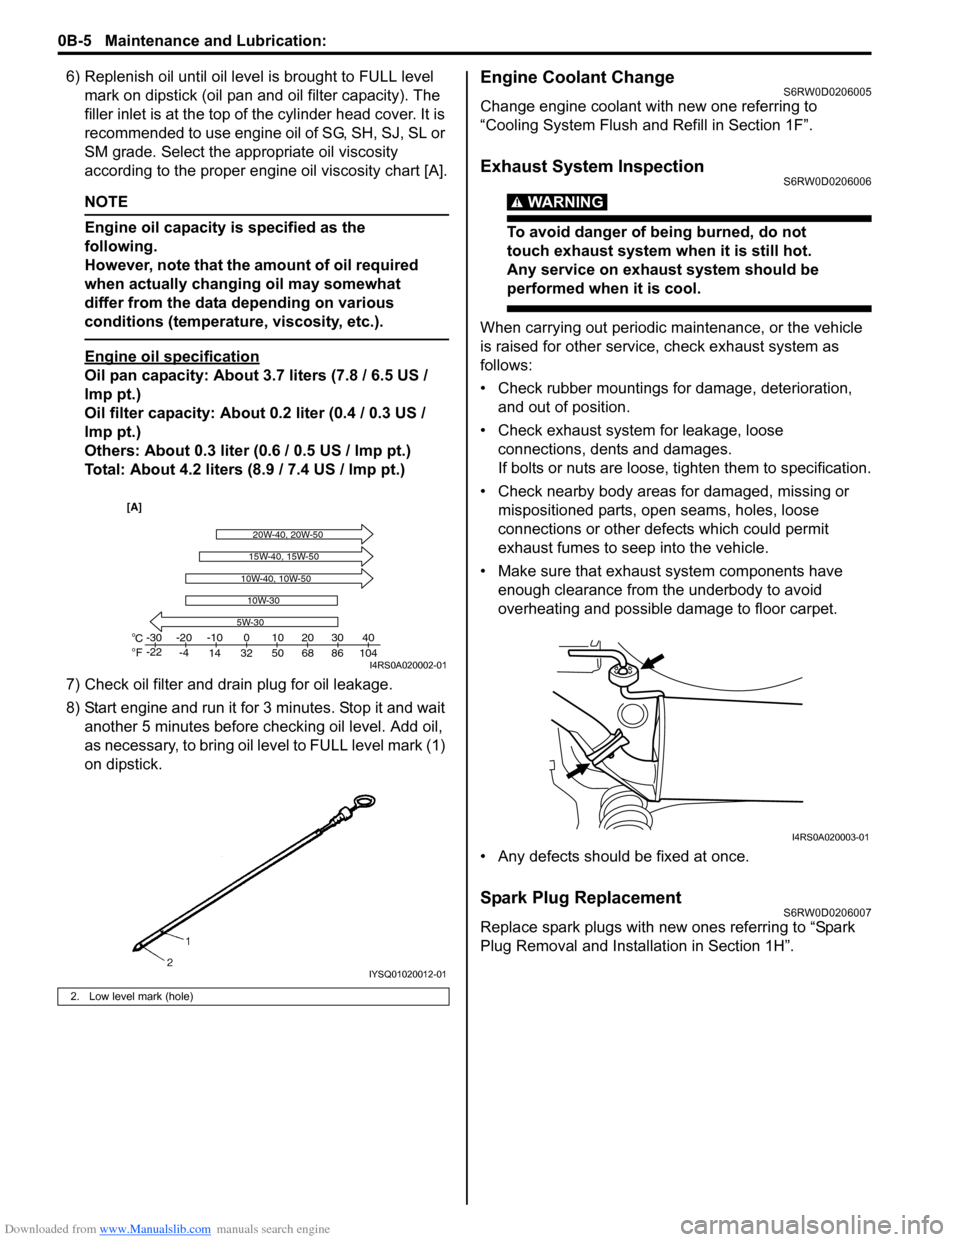 SUZUKI SX4 2006 1.G Service Workshop Manual Downloaded from www.Manualslib.com manuals search engine 0B-5 Maintenance and Lubrication: 
6) Replenish oil until oil level is brought to FULL level 
mark on dipstick (oil pan and oil filter capacity